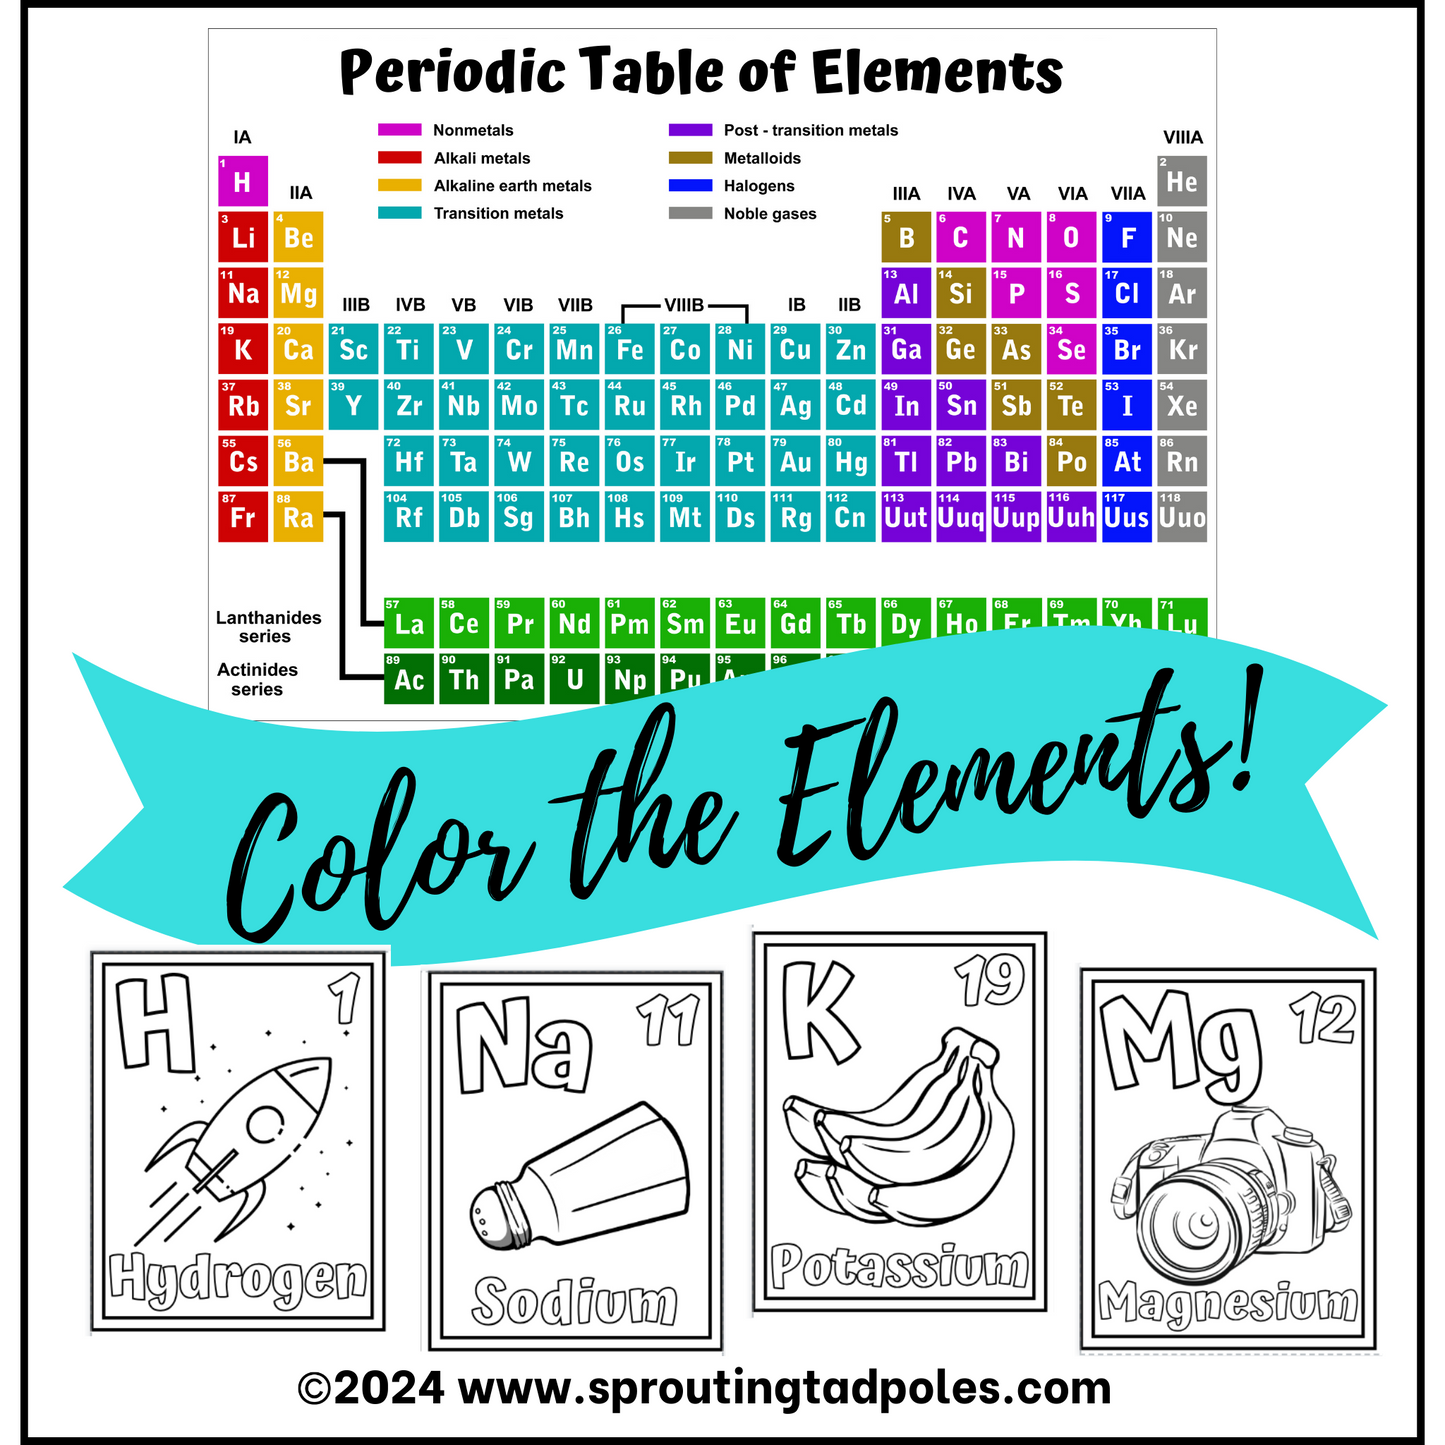 Elements of the Periodic Table Coloring Cards - PHYSICAL & DIGITAL VERSION